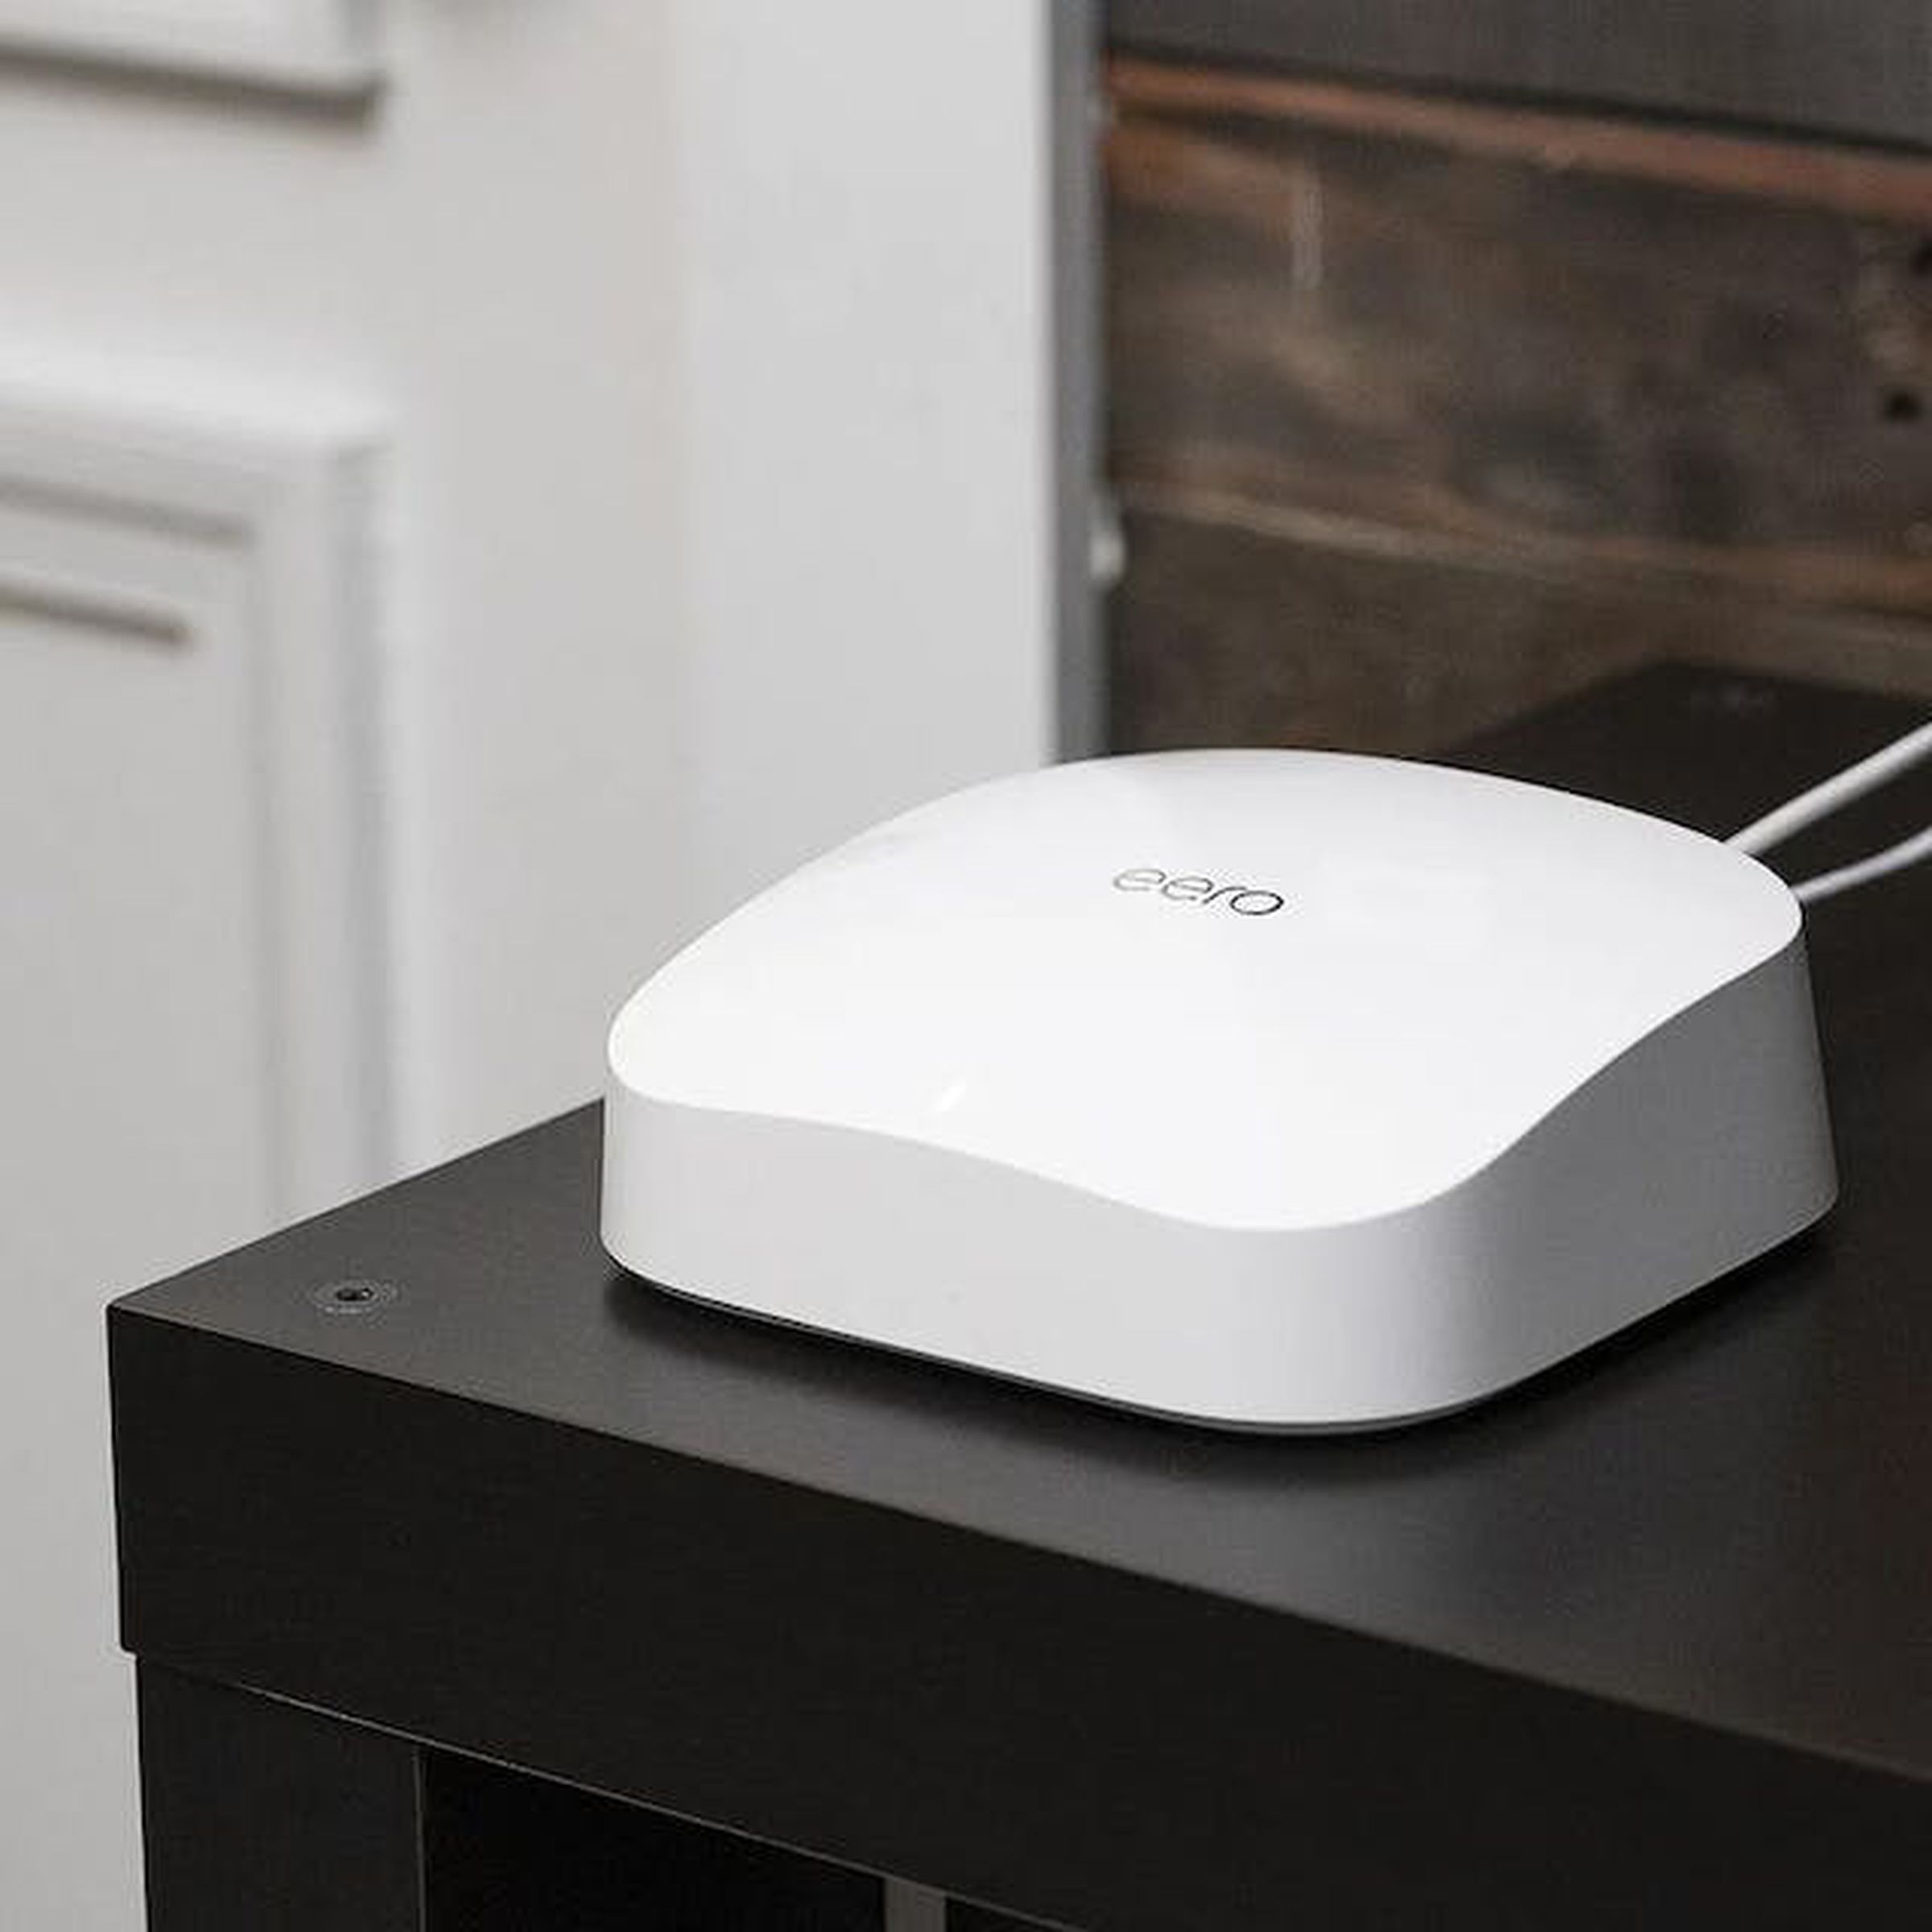 Eero Wi-Fi routers are Thread border routers, too.